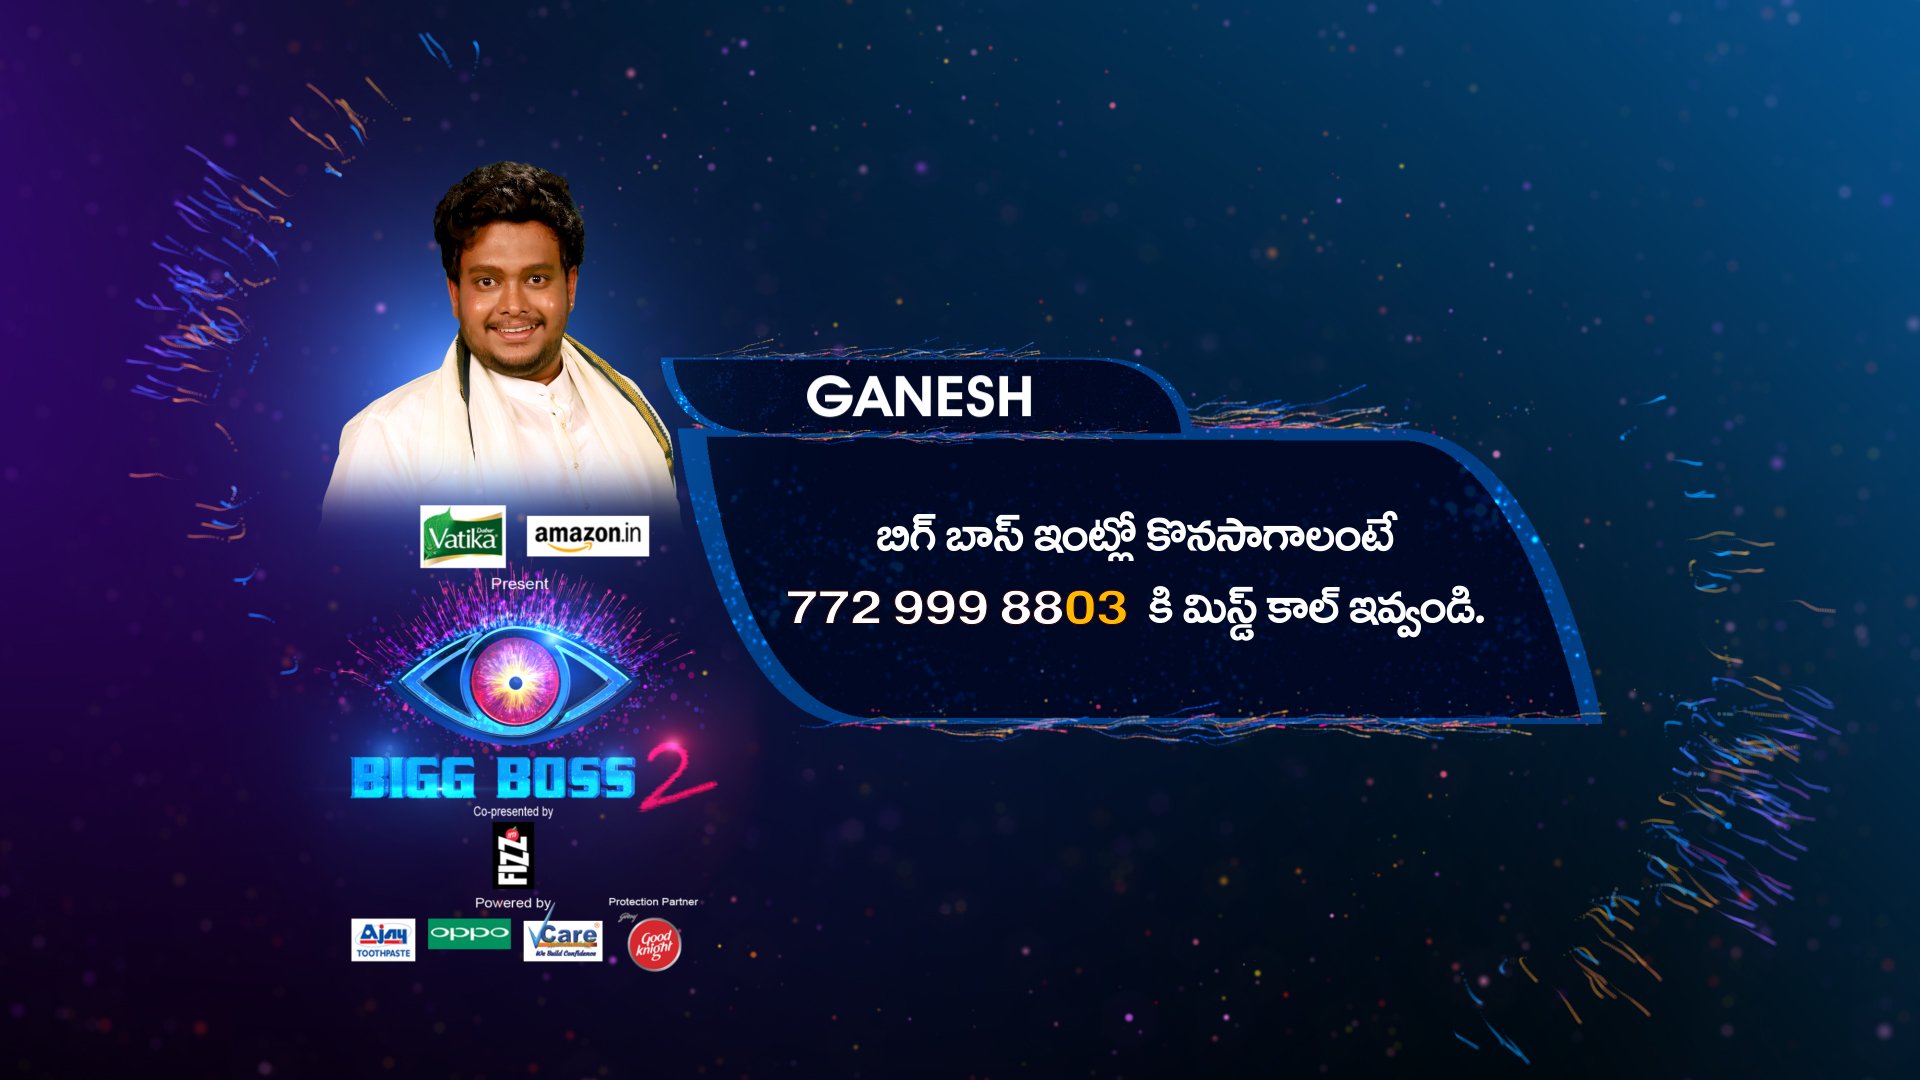 Starmaa on Twitter: "To vote your favorite Open Google search and type Boss Telugu or Give missed call to below numbers. #BiggBossTelugu2 https://t.co/tHZKCmaNMP" / Twitter